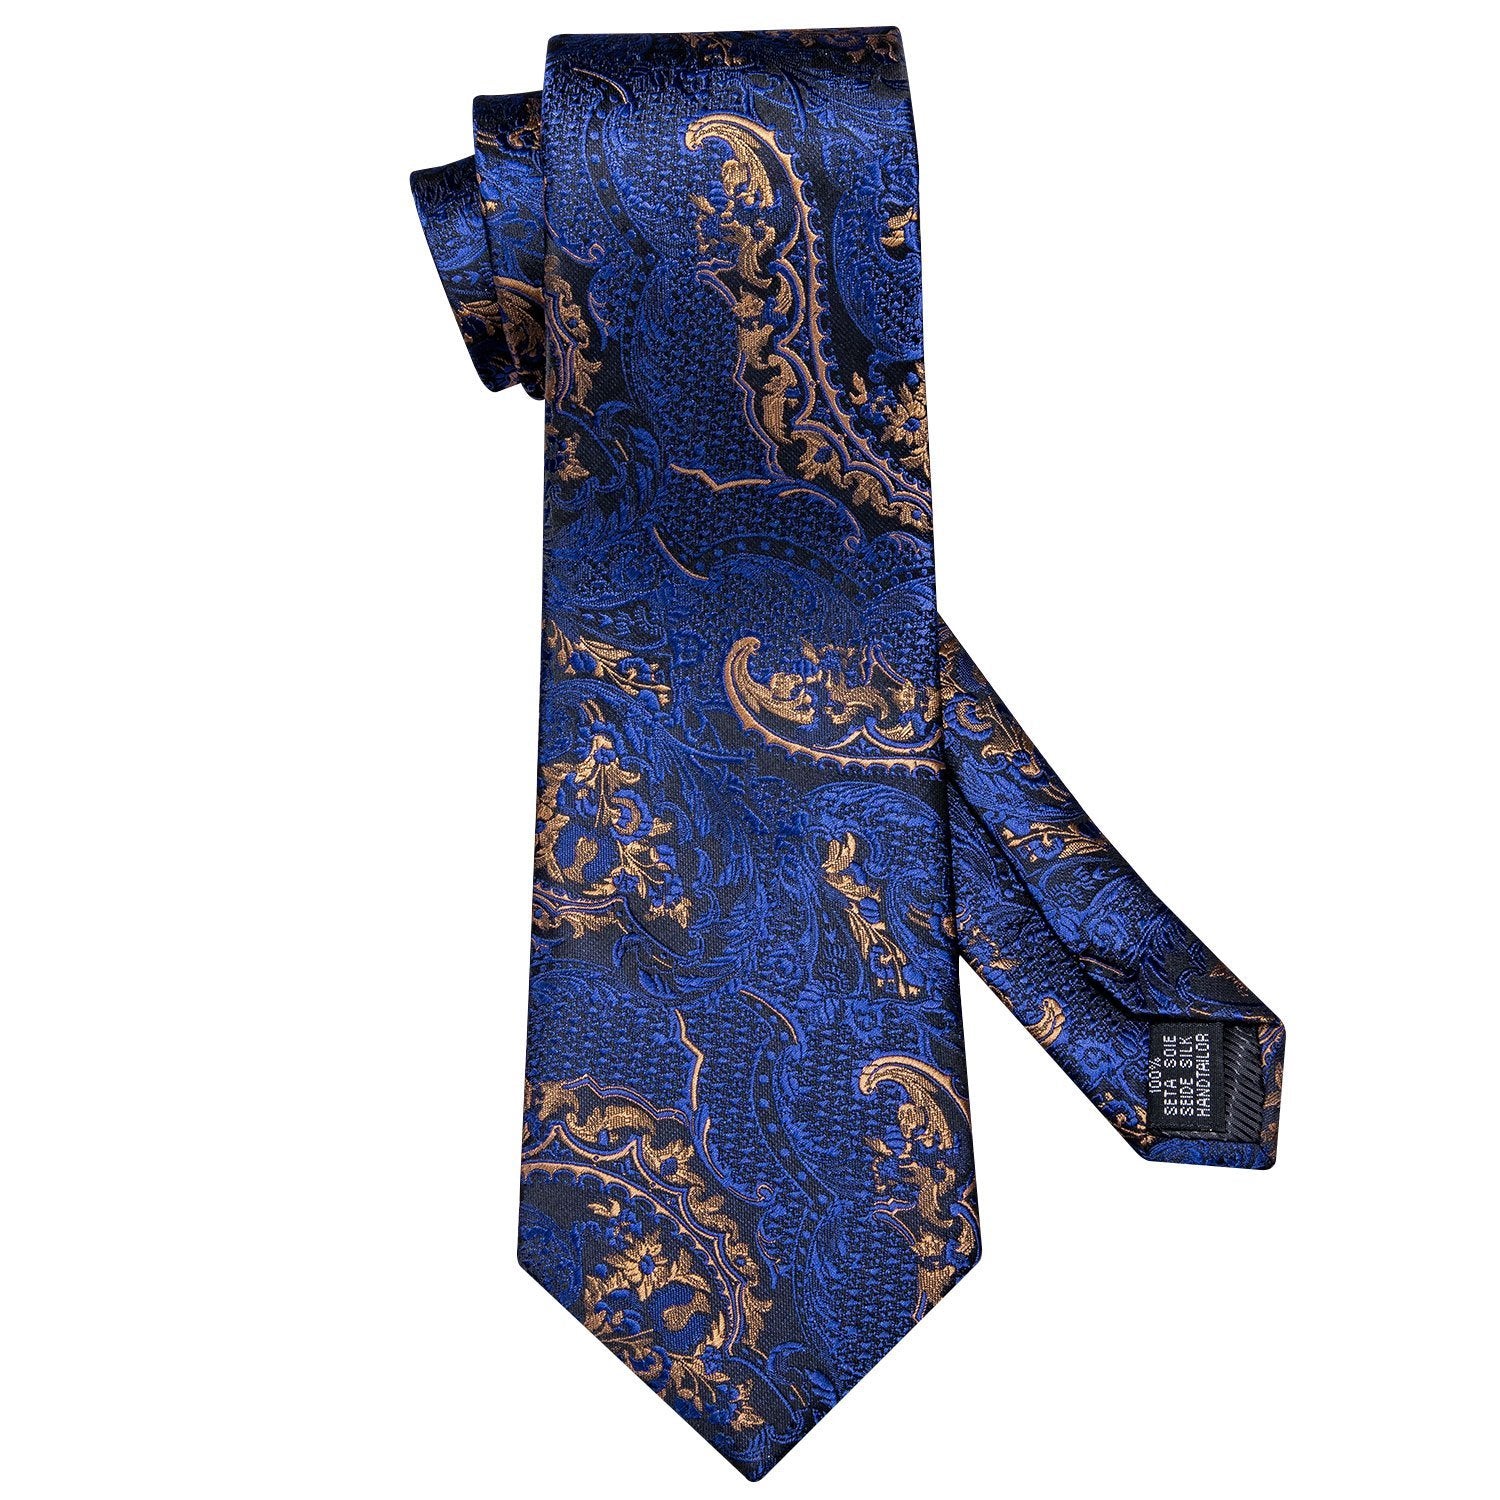 Luxury Blue Golden Paisley Scarf with Tie Set